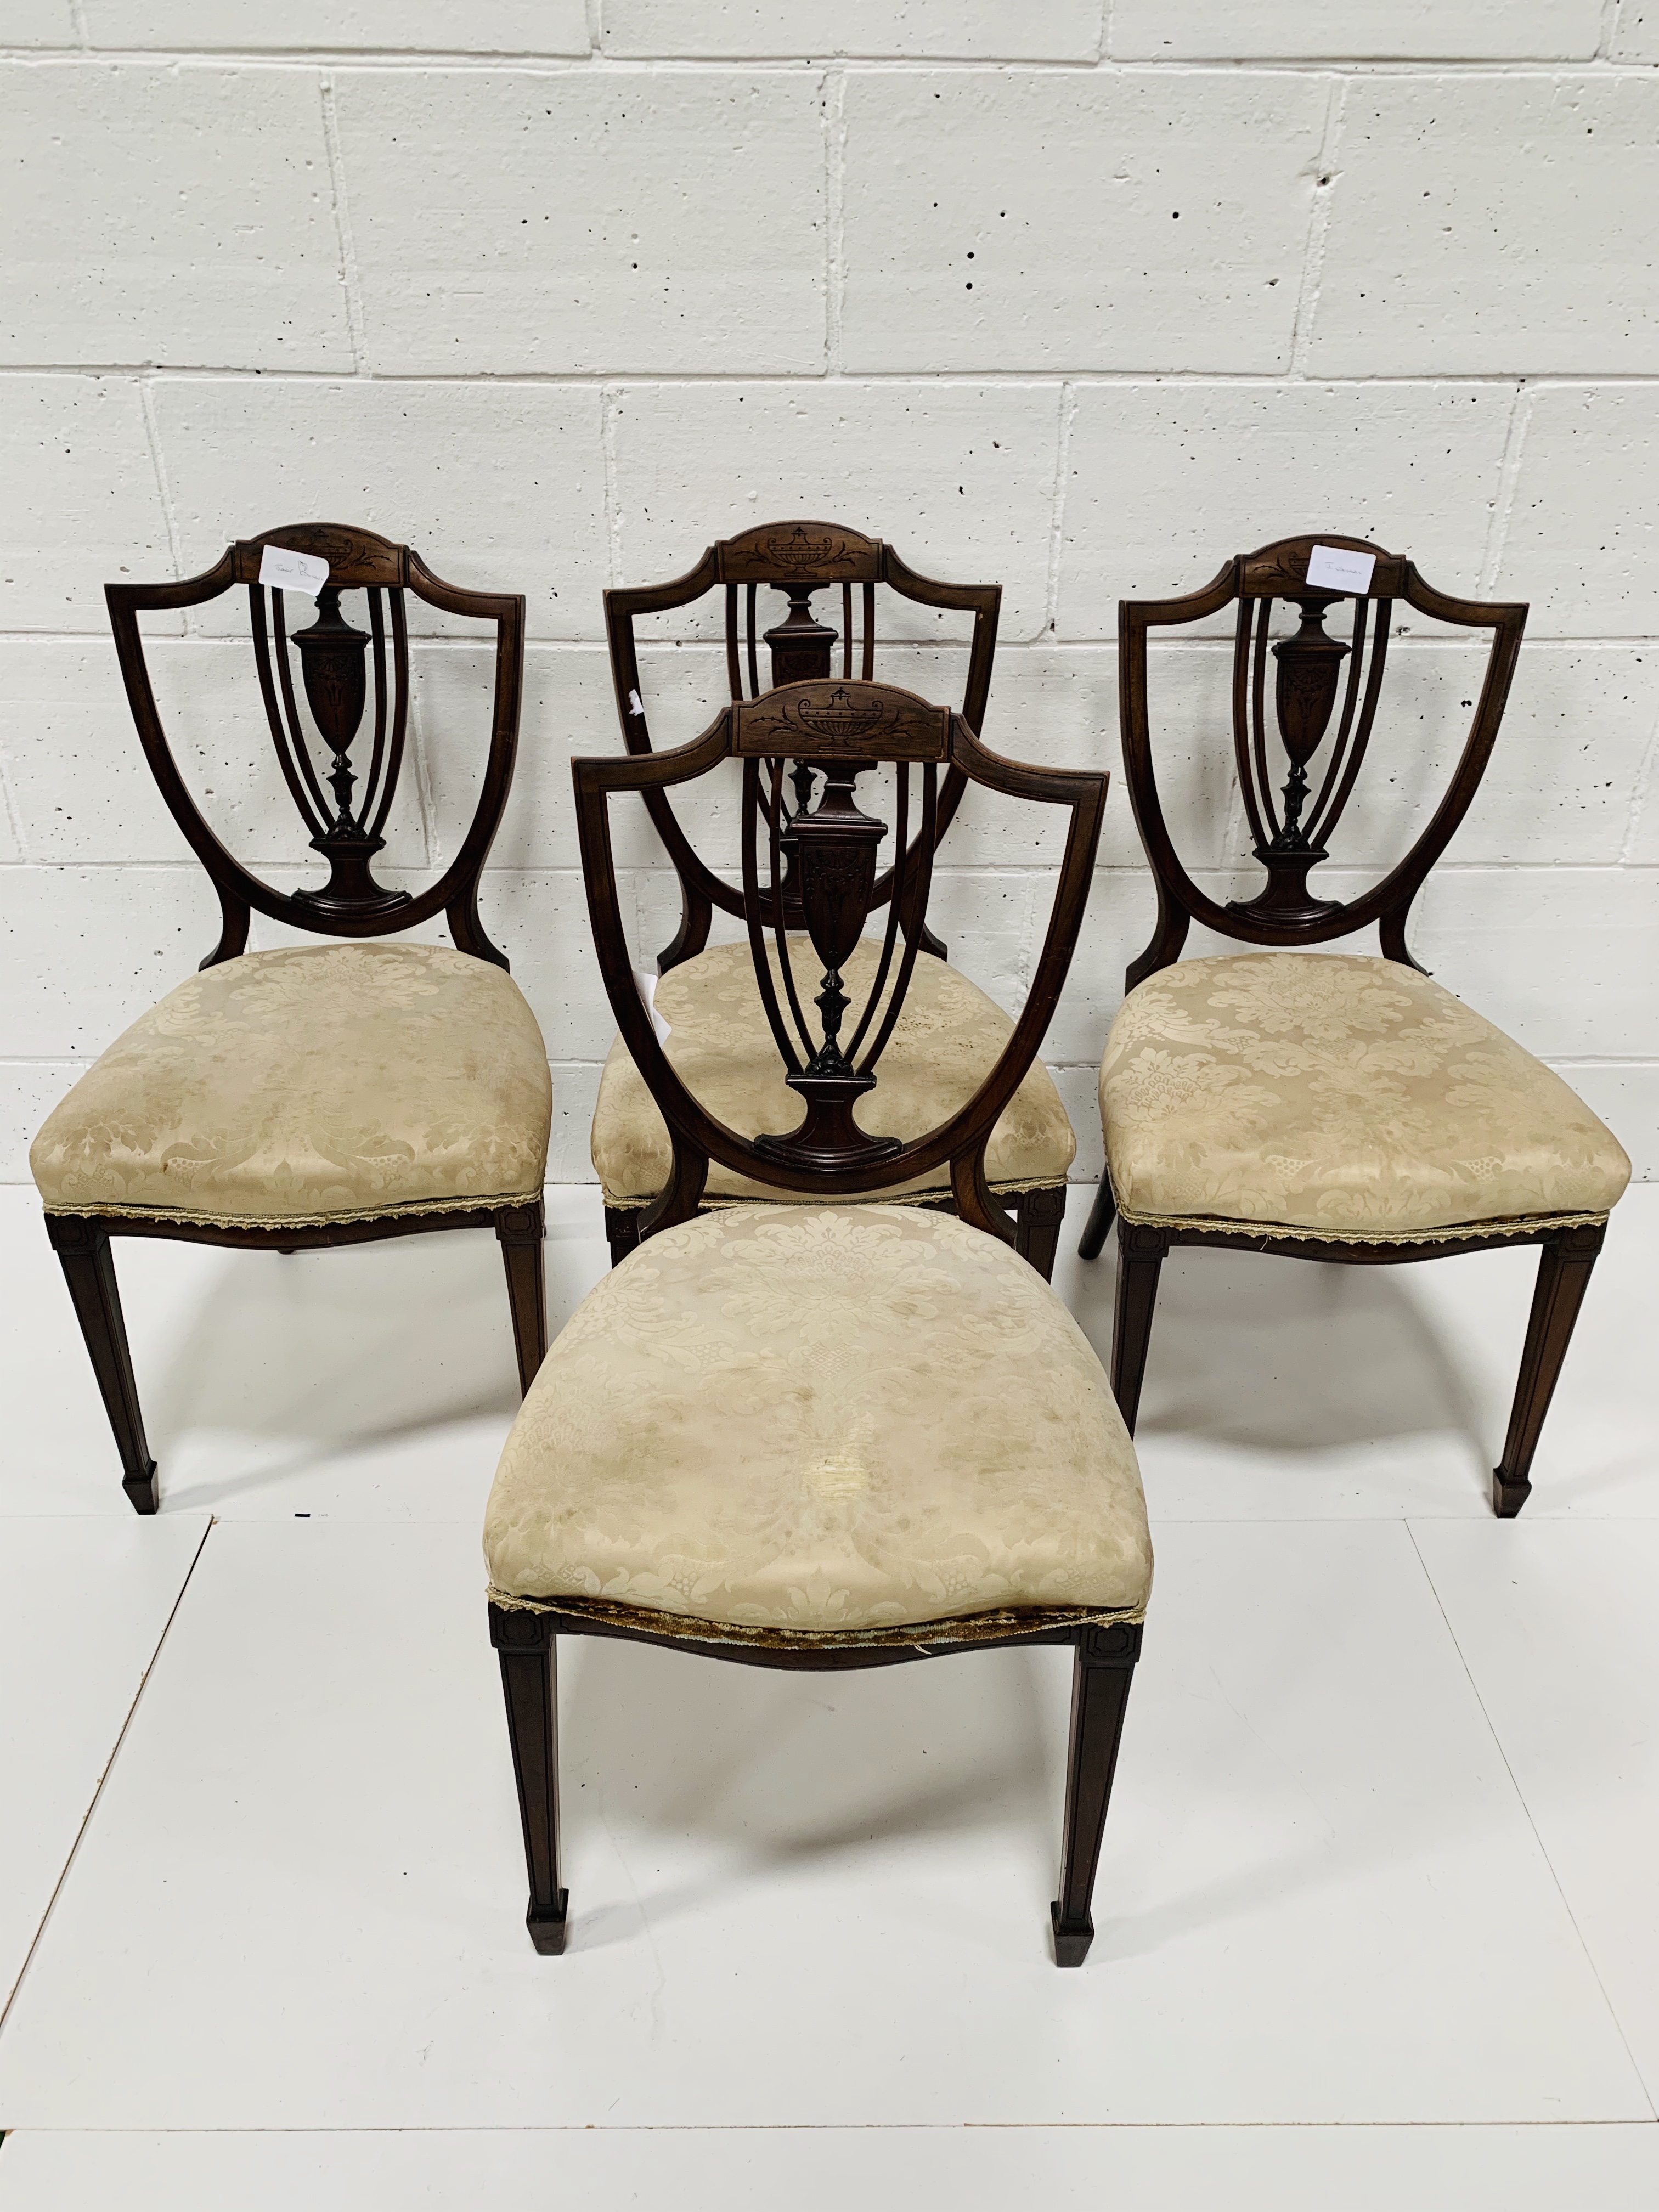 Four mahogany shield back dining chairs.